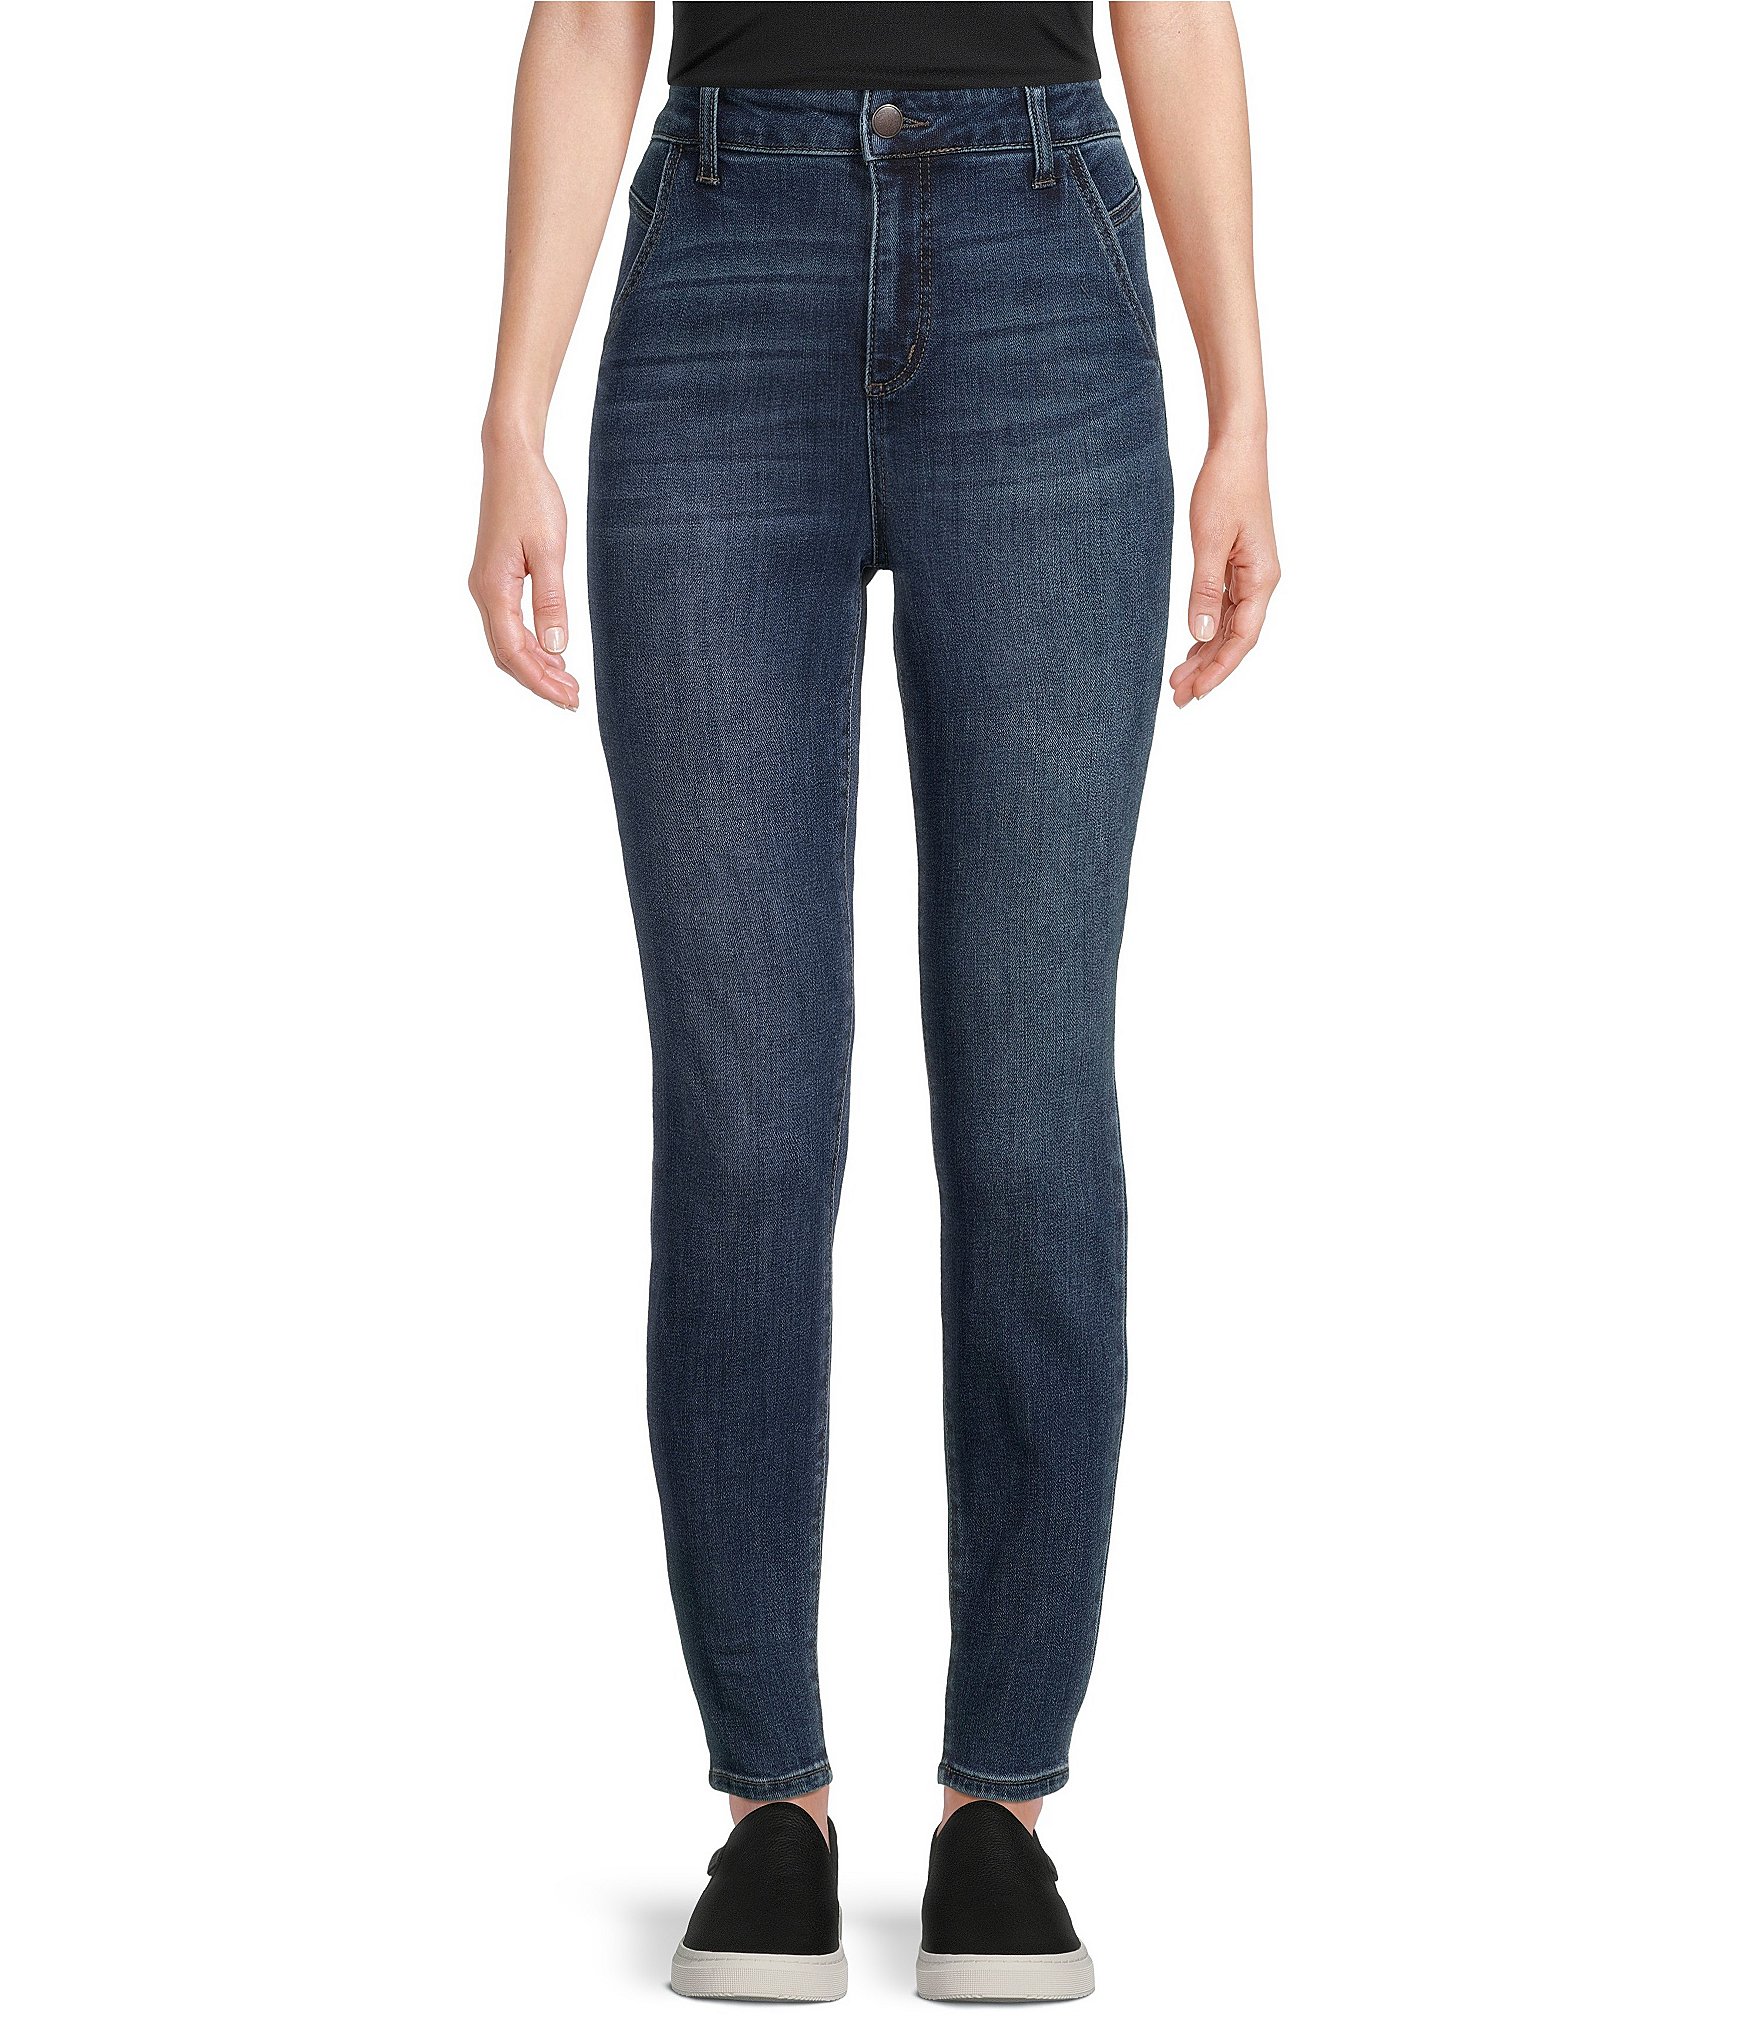 Westbound the TROUSER Ankle Skinny High Rise Denim Jeans | Dillard's